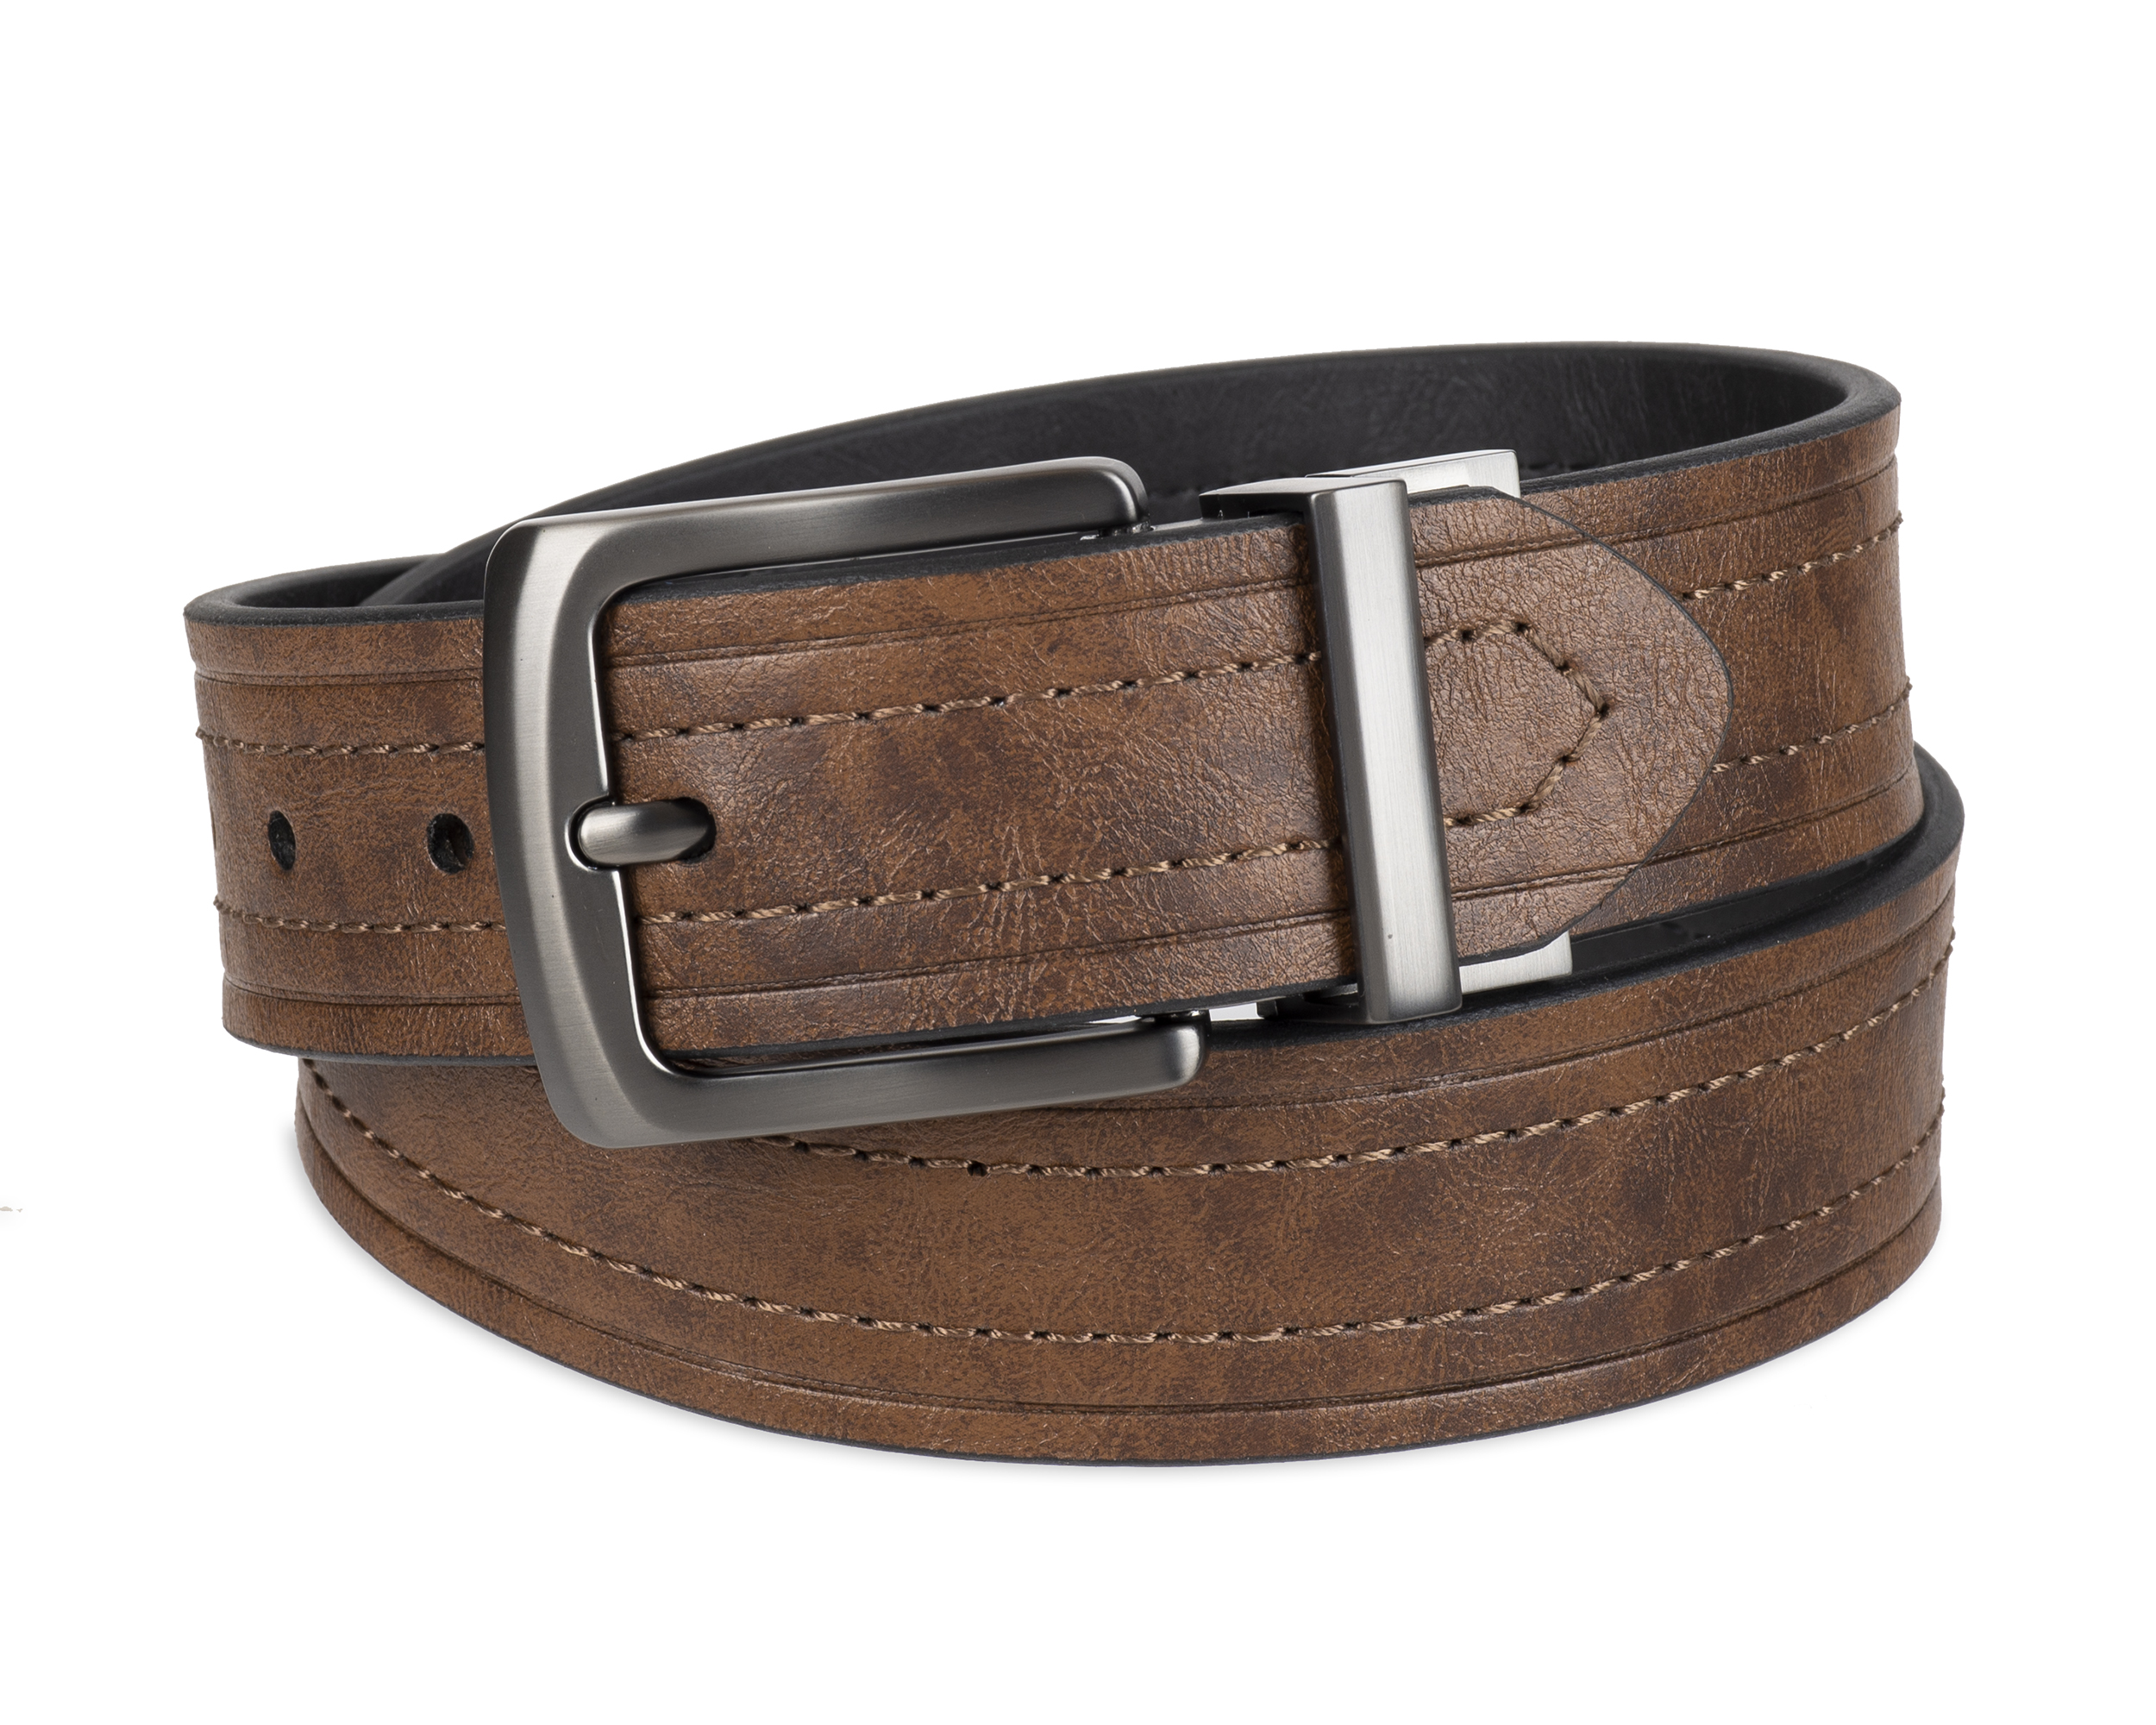 Levi's Men's Two-in-One Reversible Casual Belt, Brown/Black - image 1 of 9